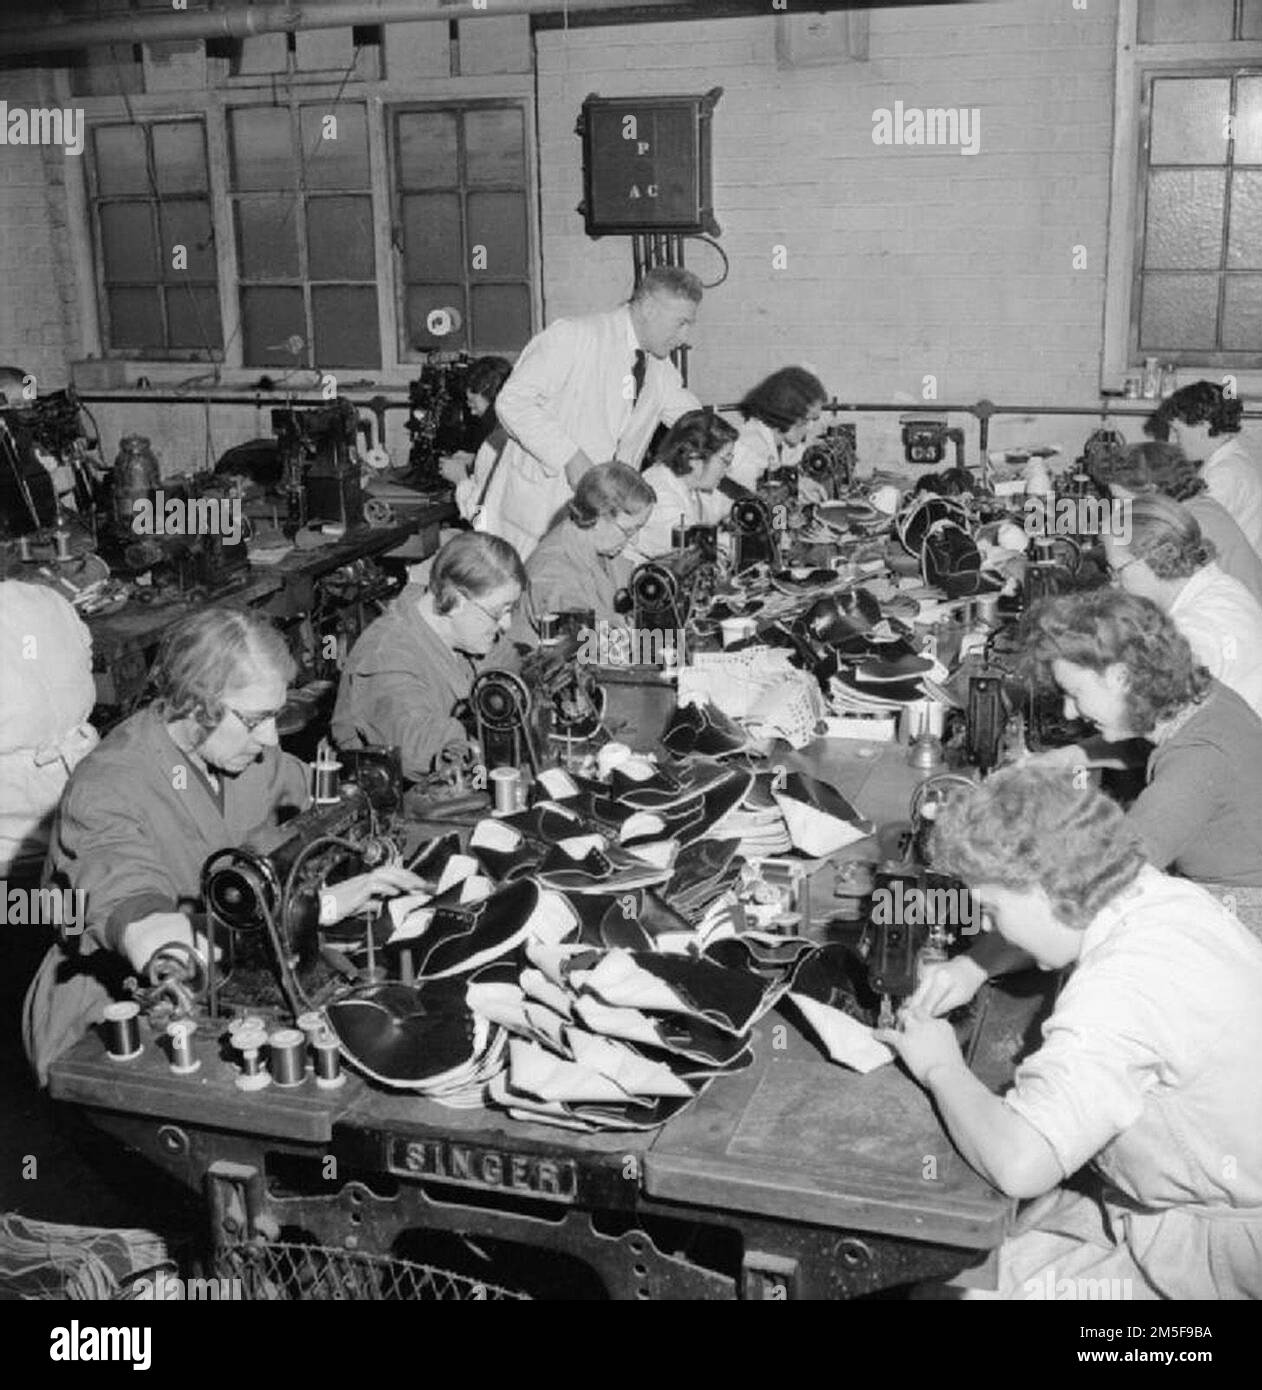 At a factory somewhere in the Midlands, machinists sew together the component parts of the outsides of the shoes they are manufacturing for members of the Women's Royal Naval Service.  In the background, the overseer can be seen, inspecting the work of one of the women. Stock Photo